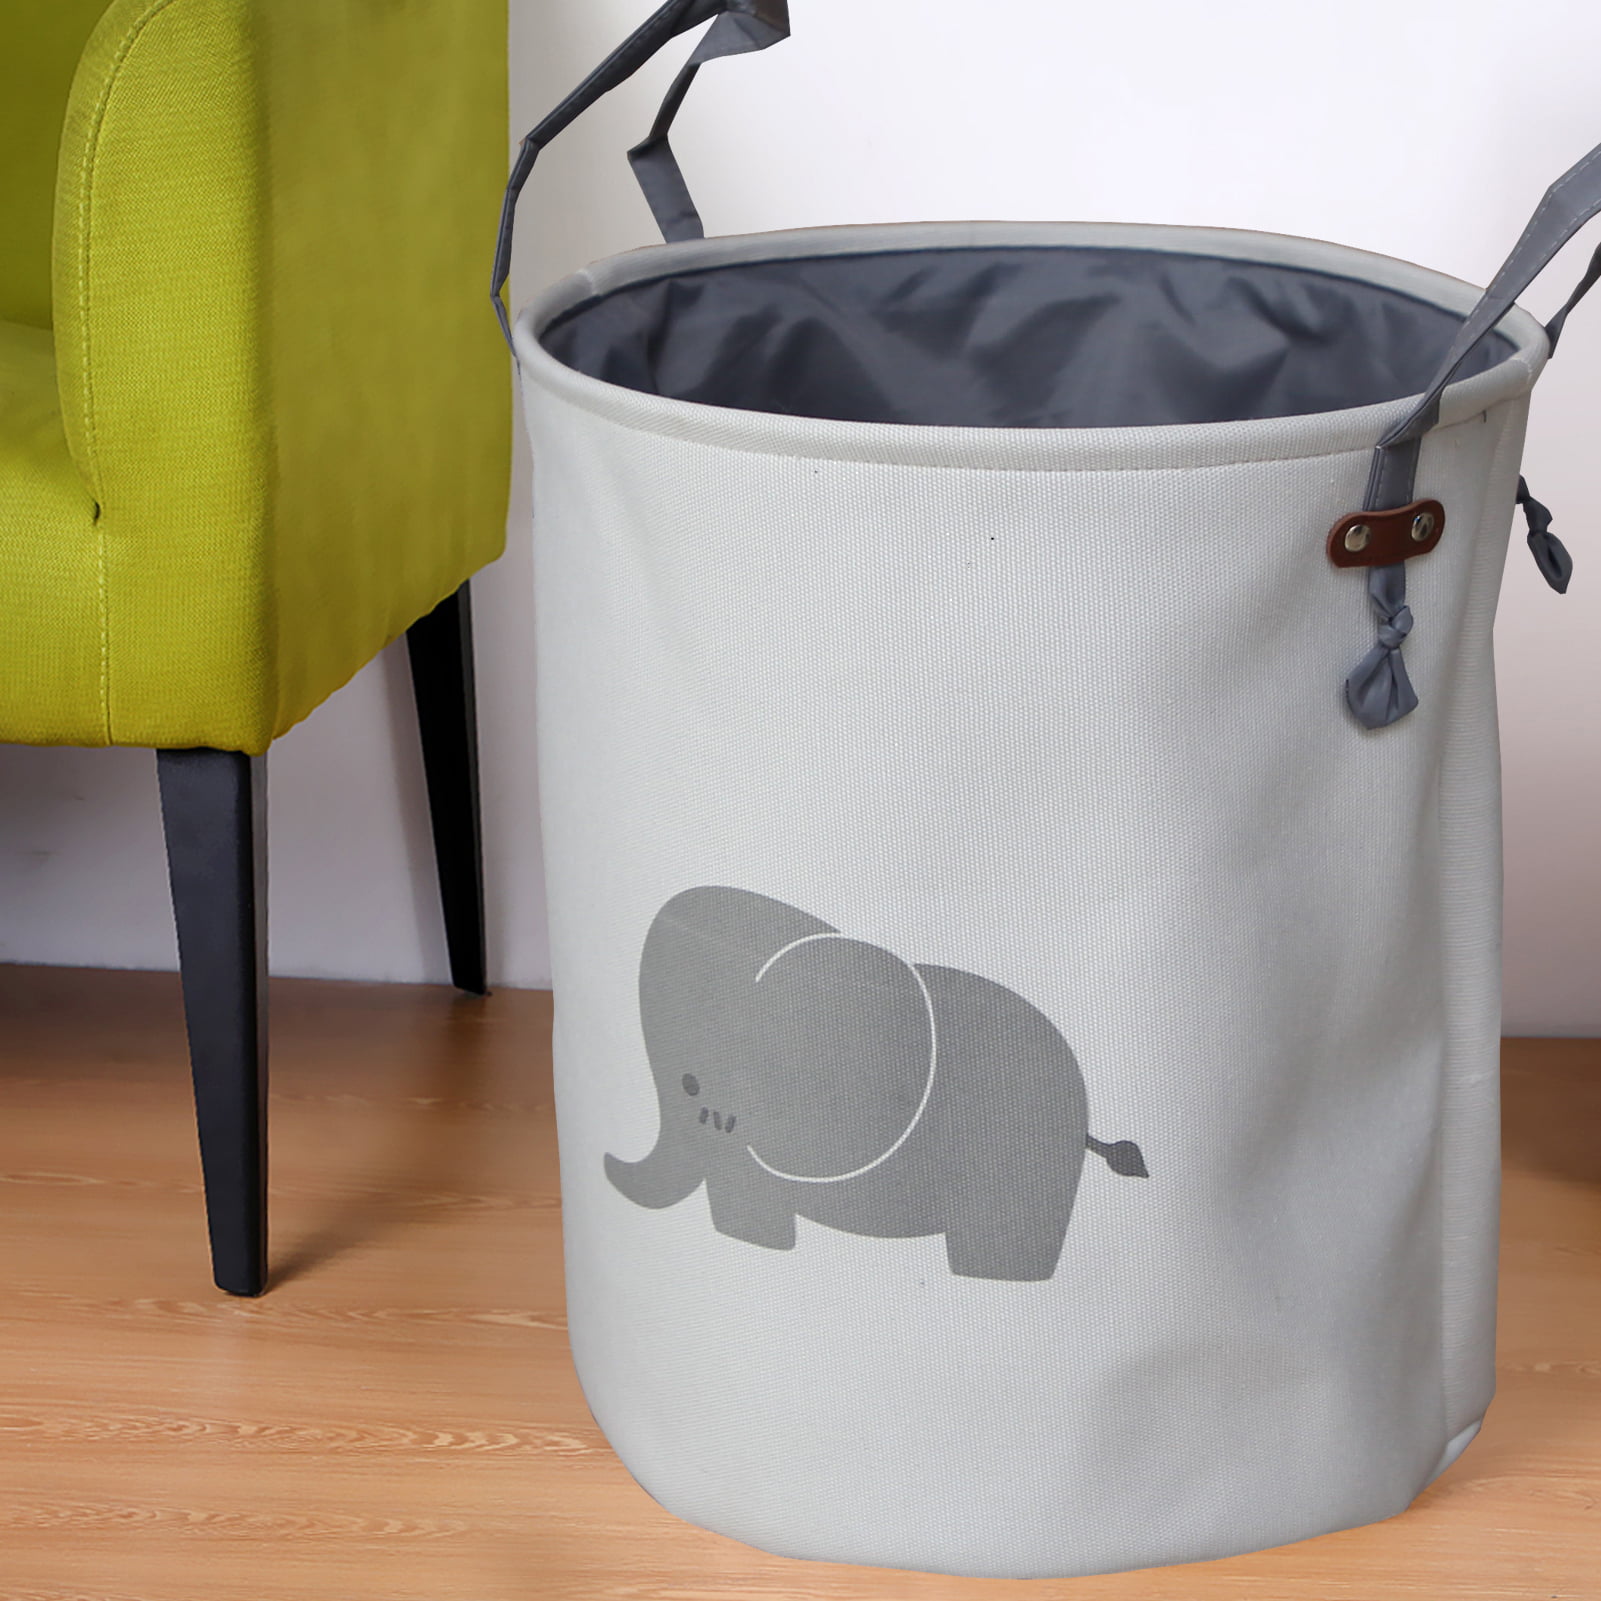 Clothes Home Baby Nursery Use Elephant Foldable Thicken Dual-layer Fabric Round Cartoon Print Organizer Bin with Handle for Toys Pawaca Laundry Storage Basket Container 